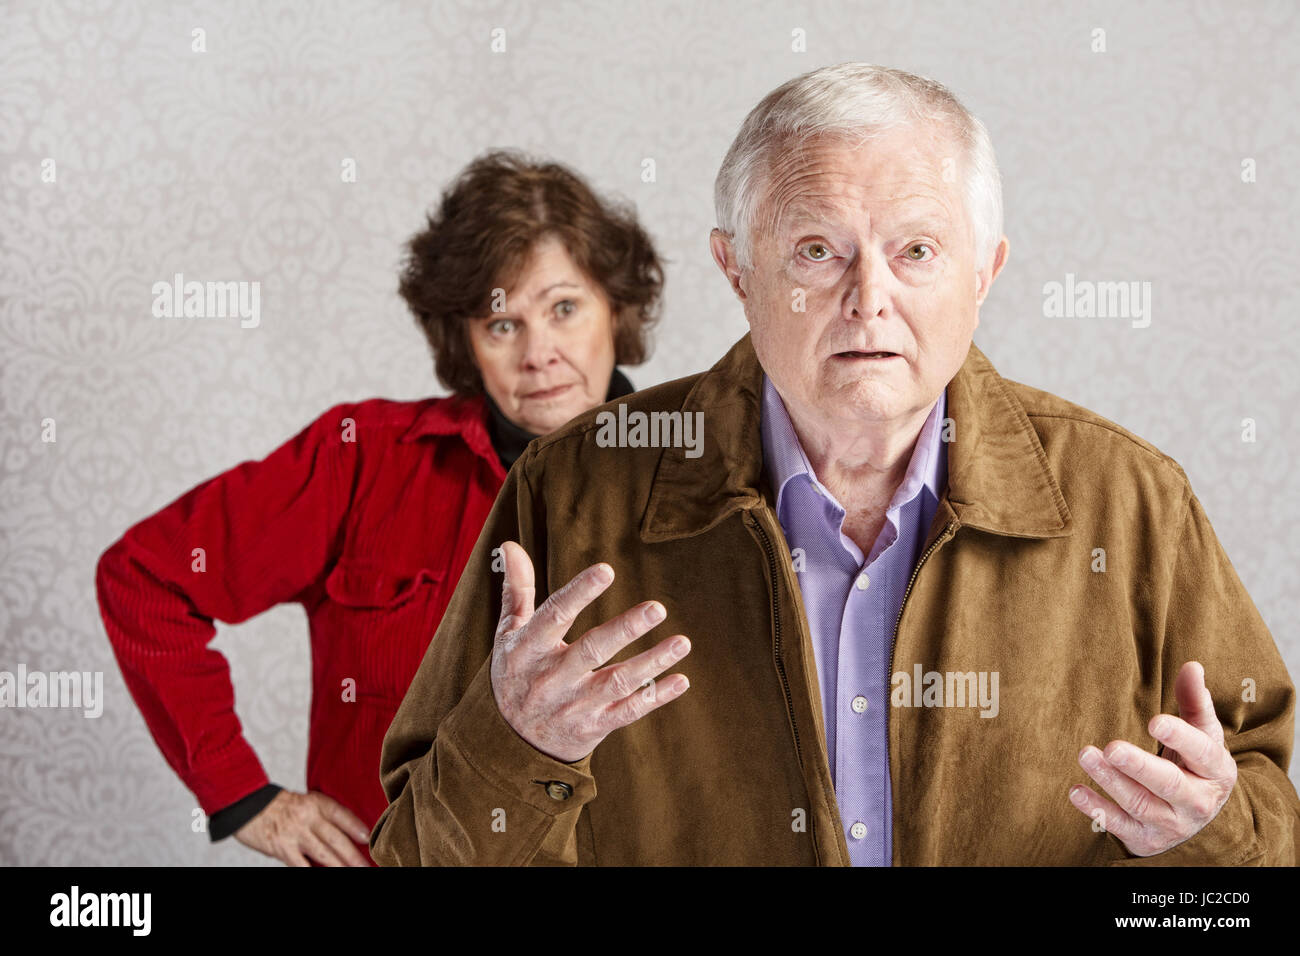 Frustrated older man with hands up and annoyed woman Stock Photo